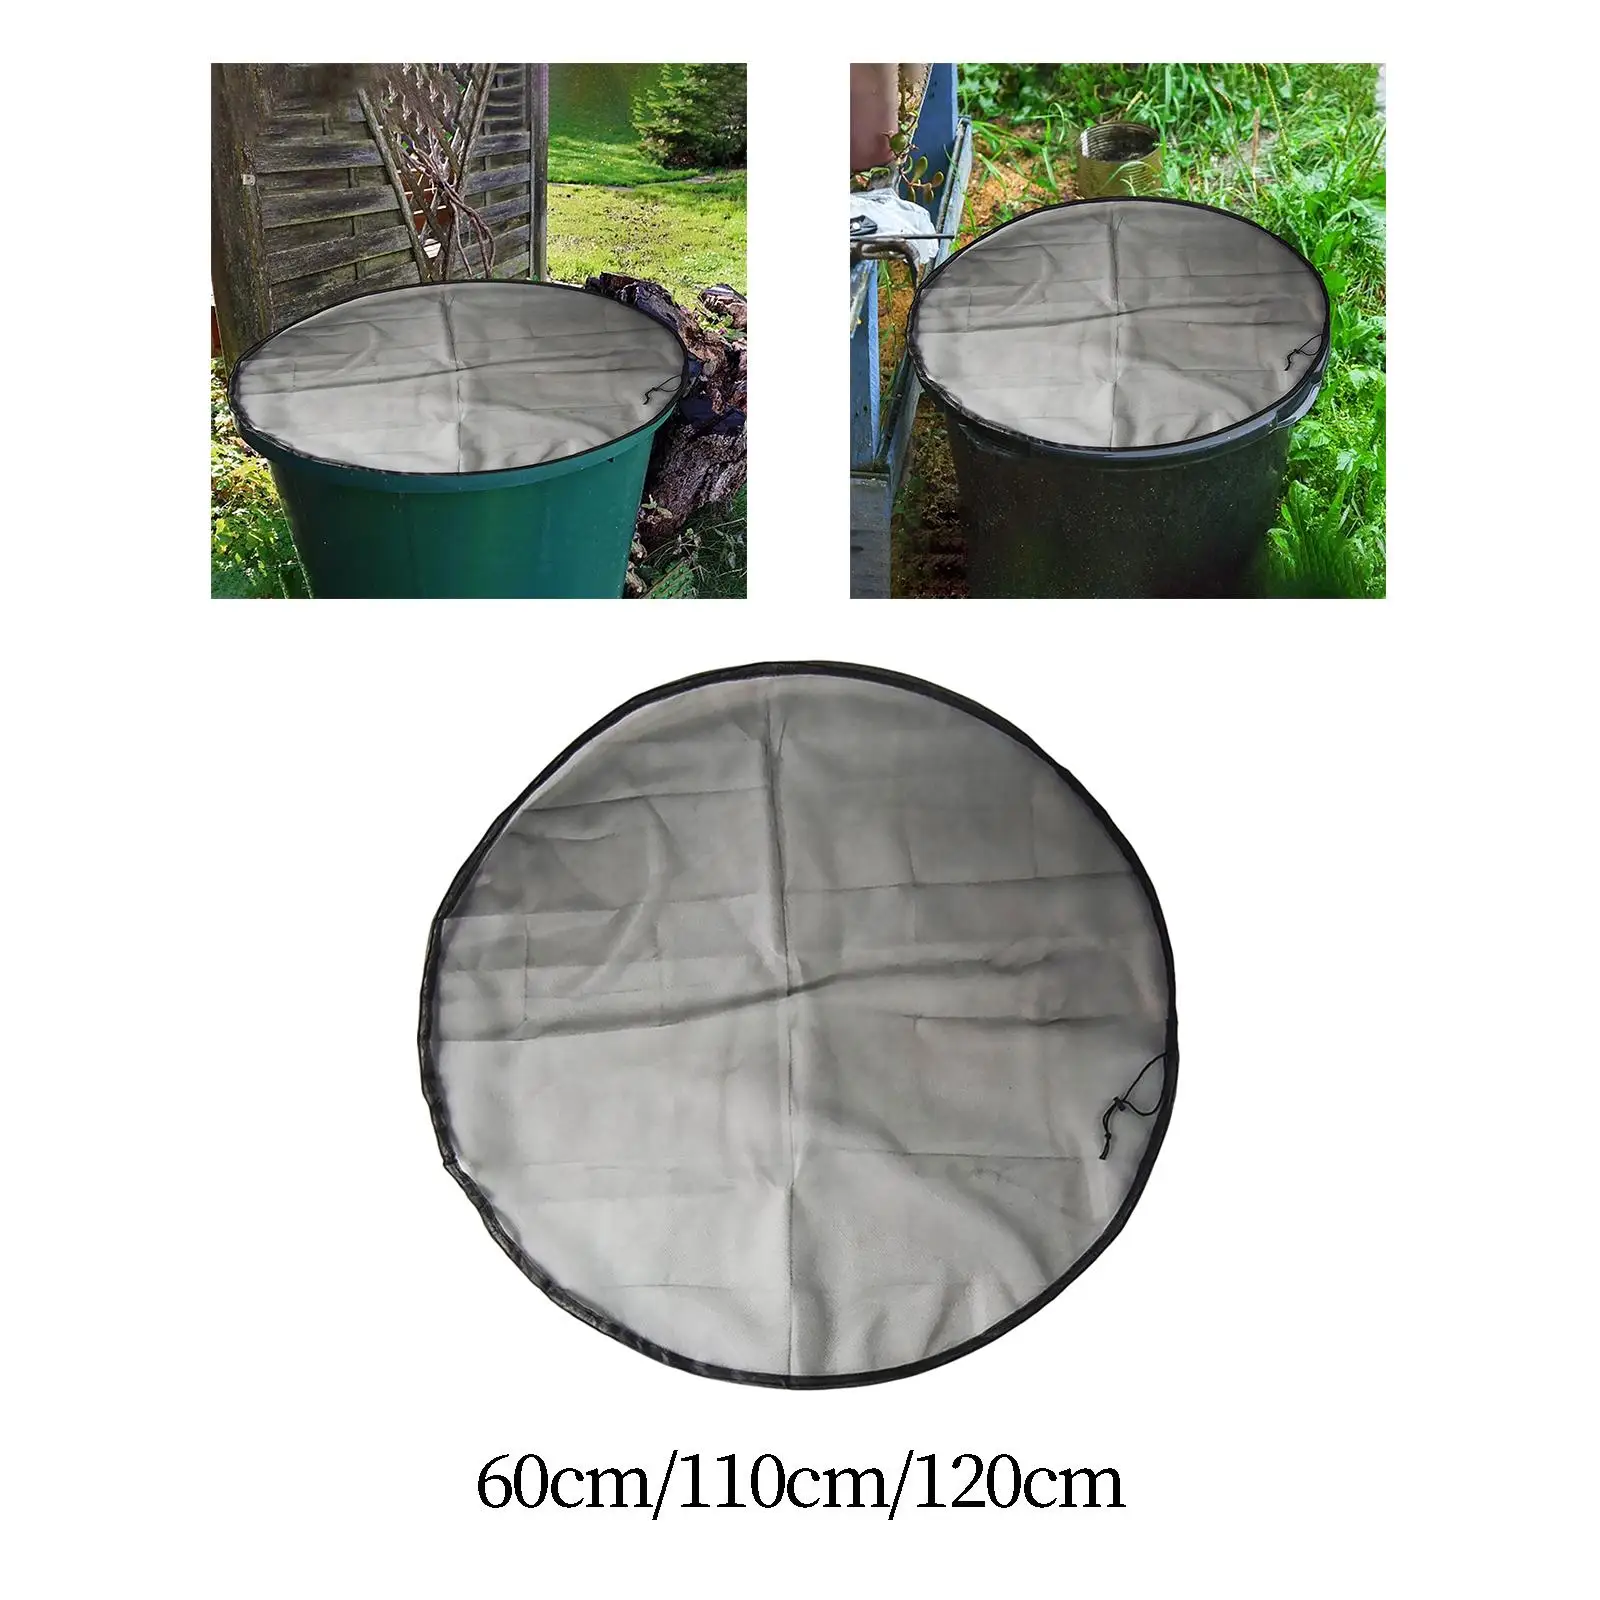 Mesh Rain Butt Cover, Mesh Water Butt Cover, Rain Bucket Cover, Adjustable with